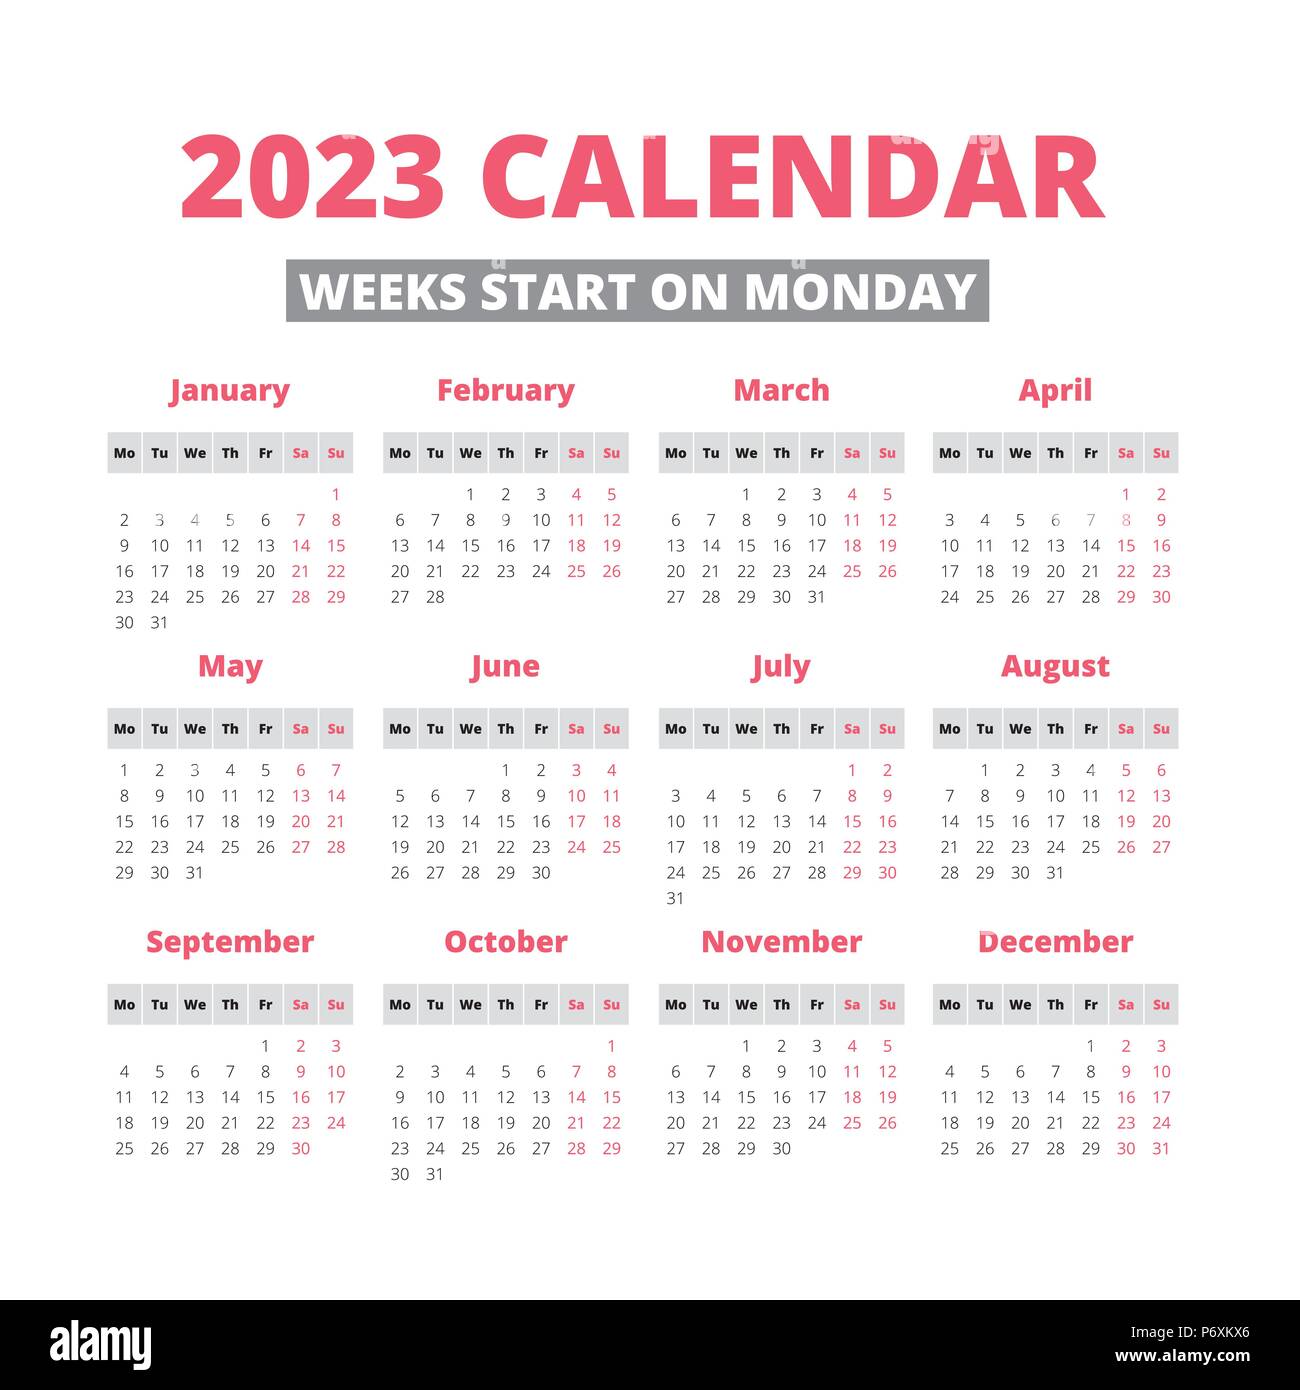 2023-calendar-with-week-numbers-shopmall-my-bank2home